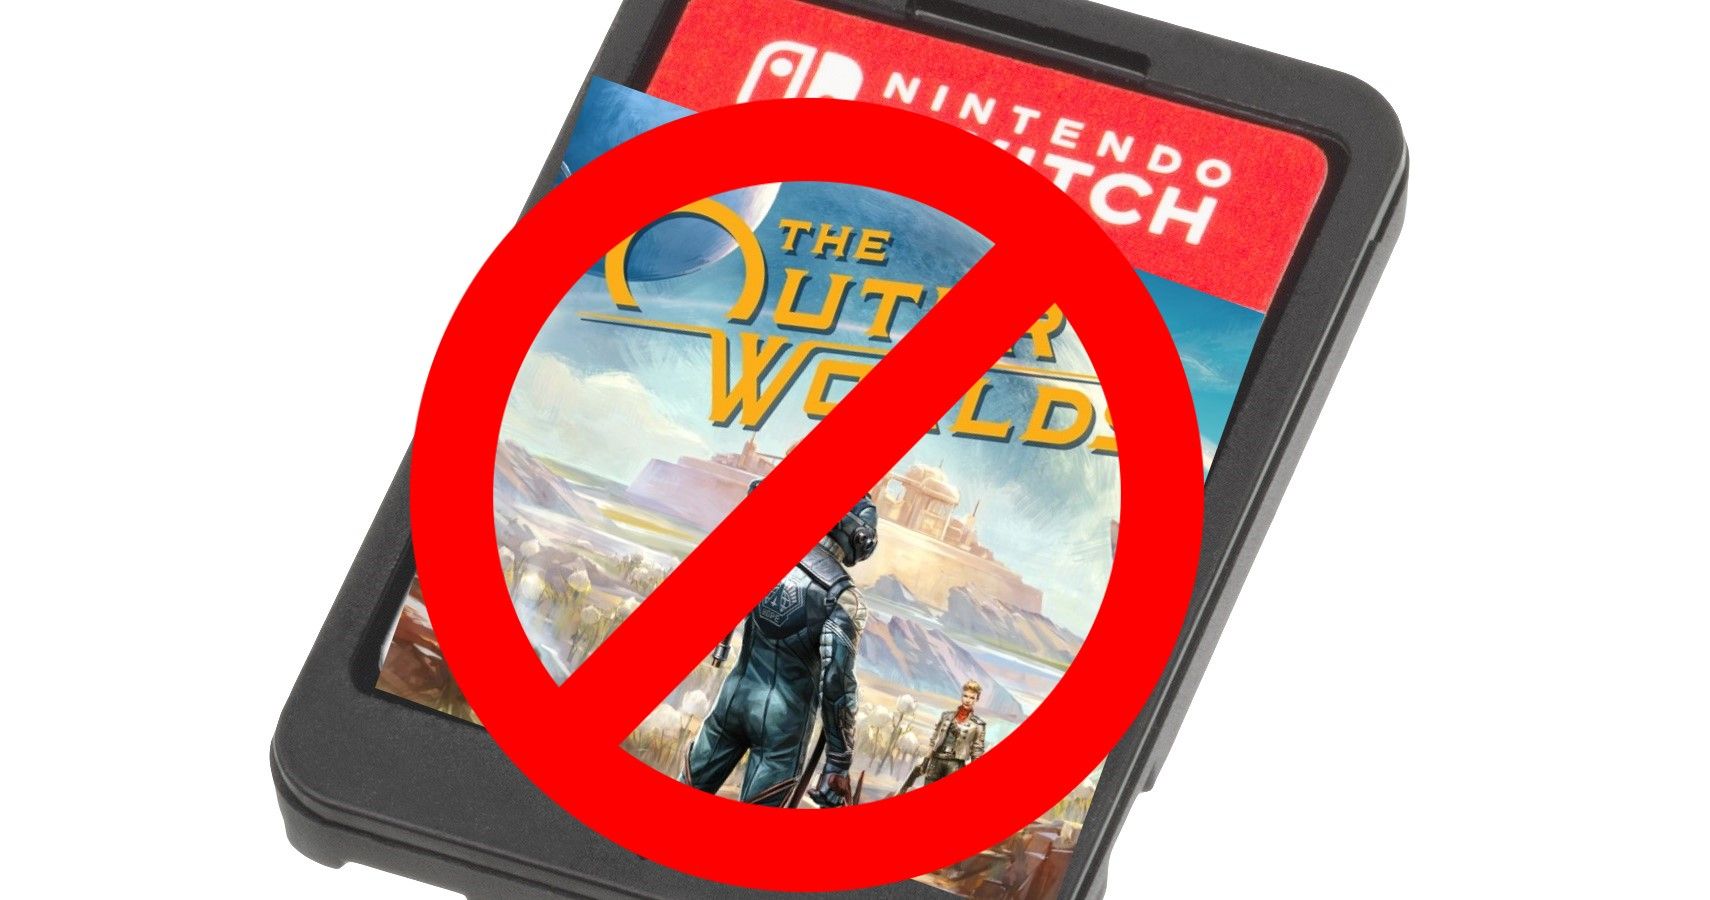 outer worlds switch physical cartridge